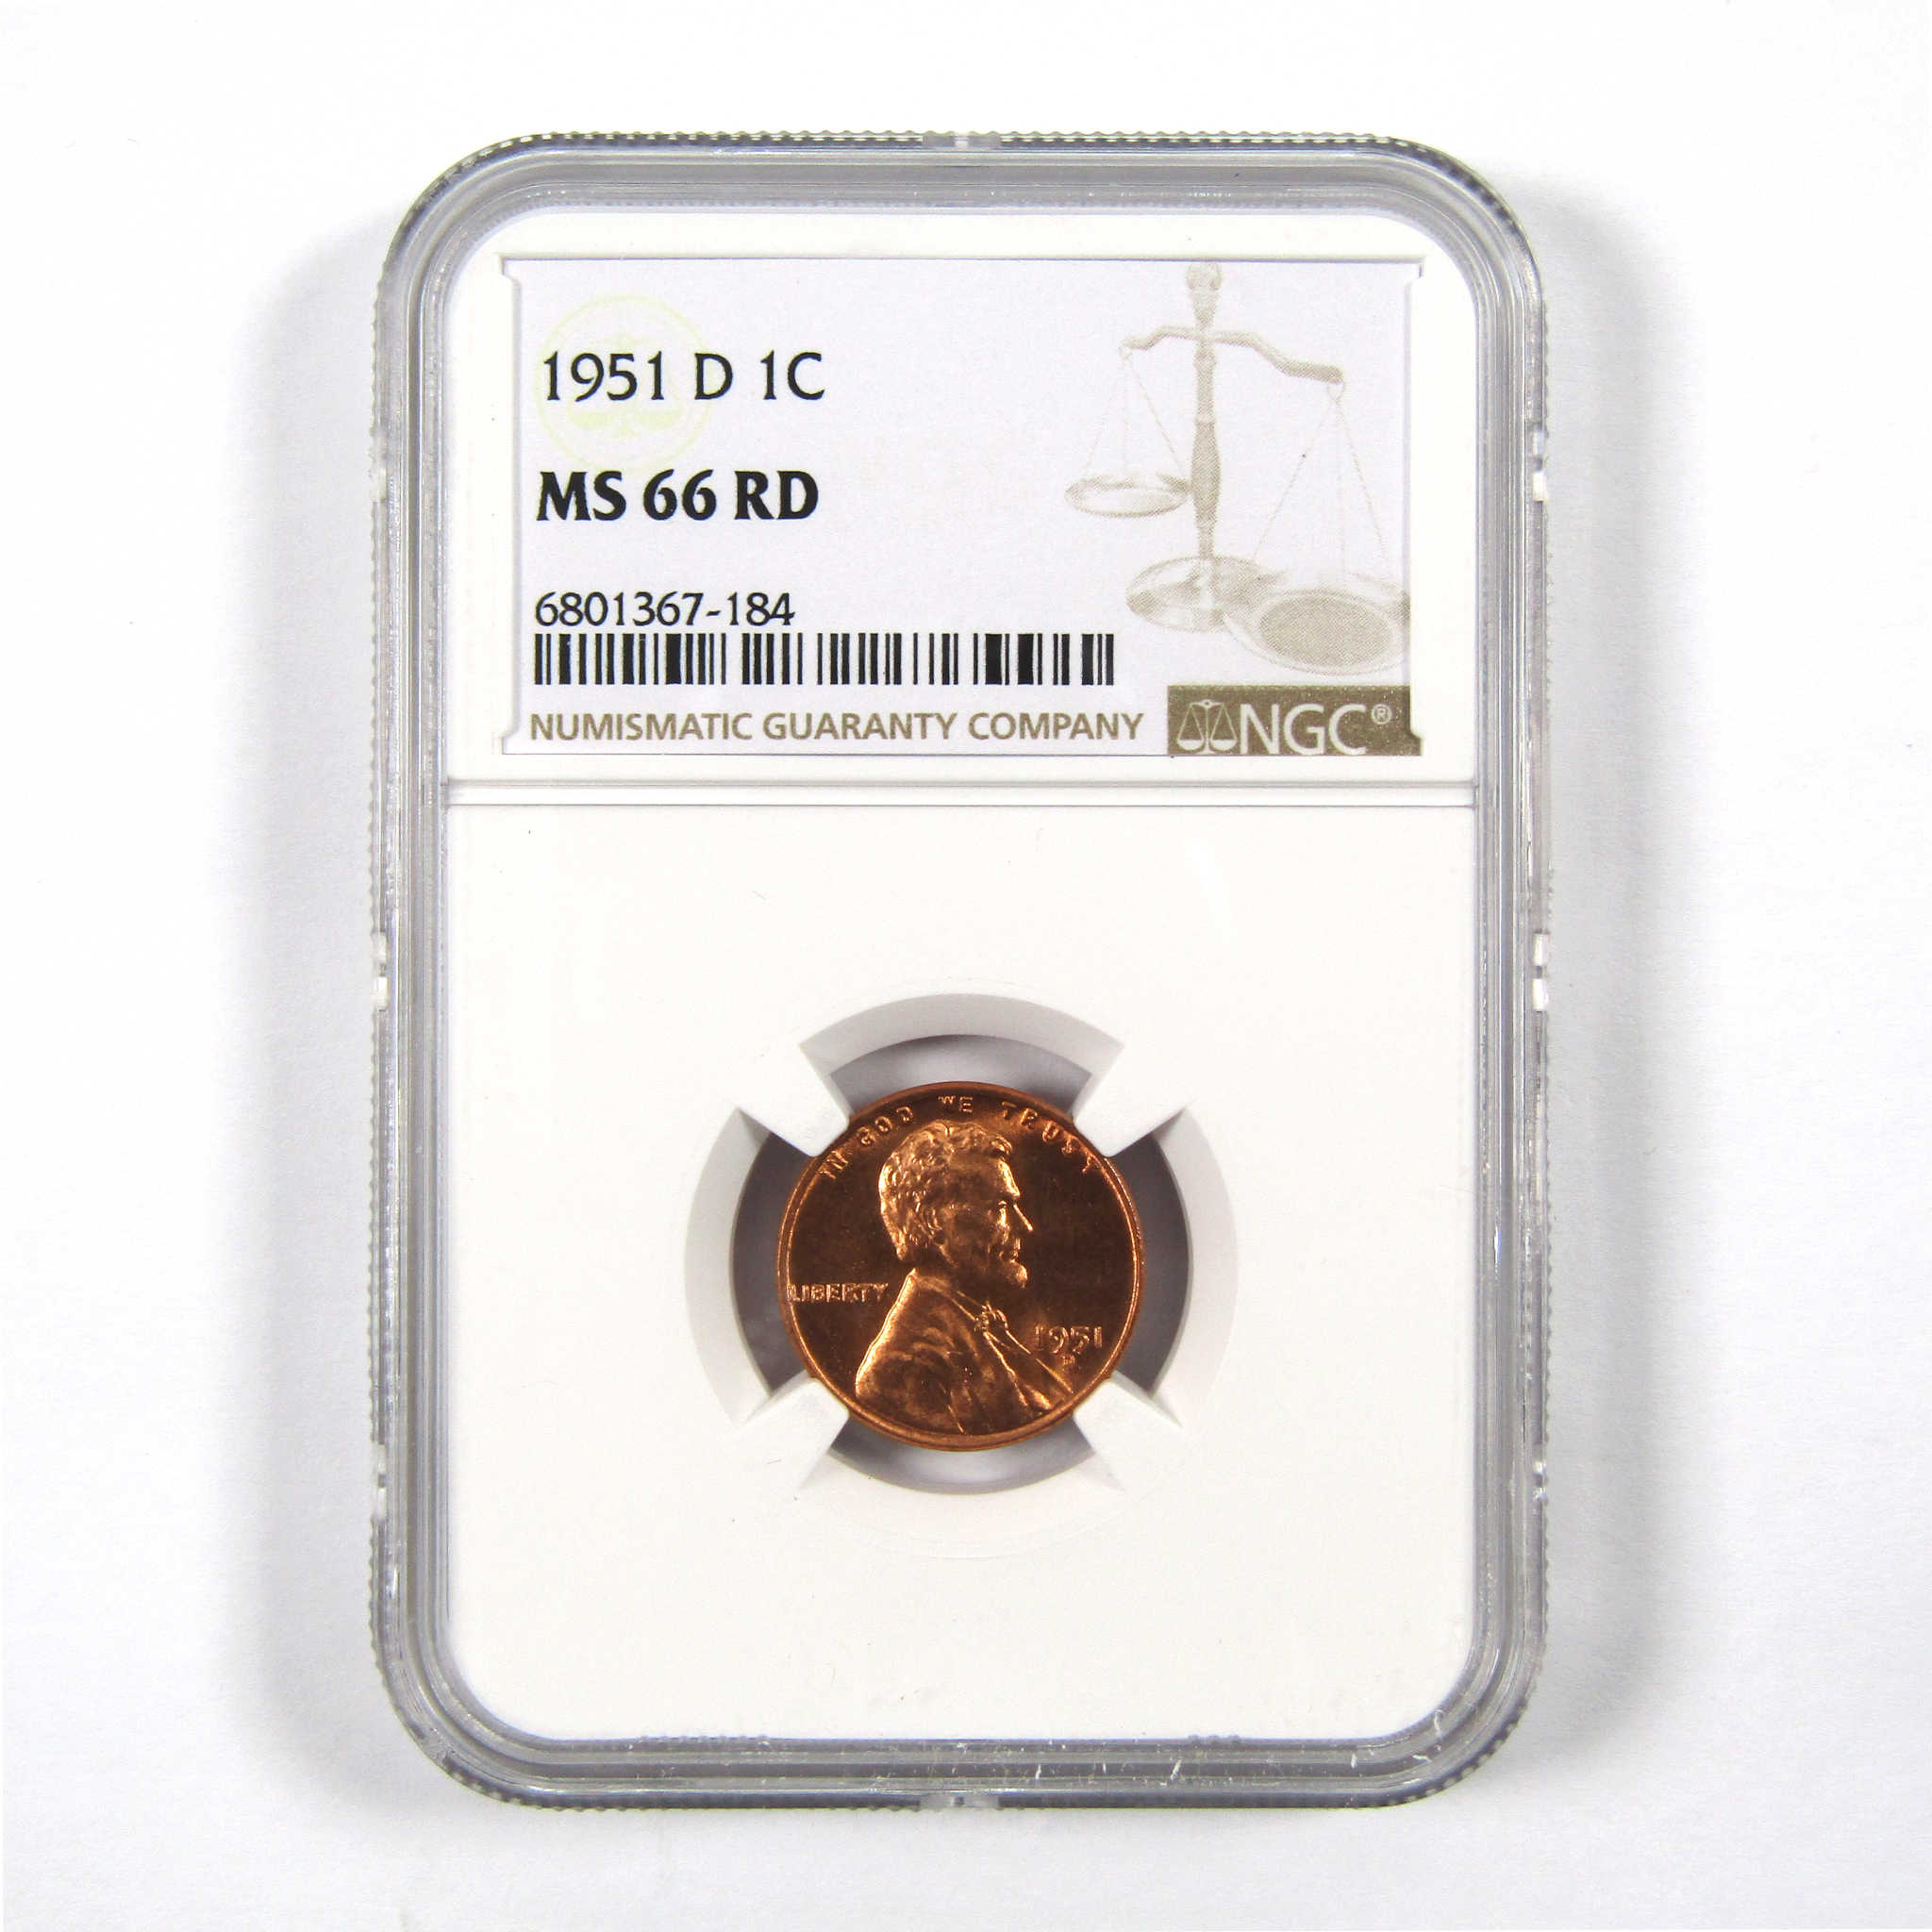 1951 D Lincoln Wheat Cent MS 66 RD NGC Penny 1c Uncirculated SKU:I9682